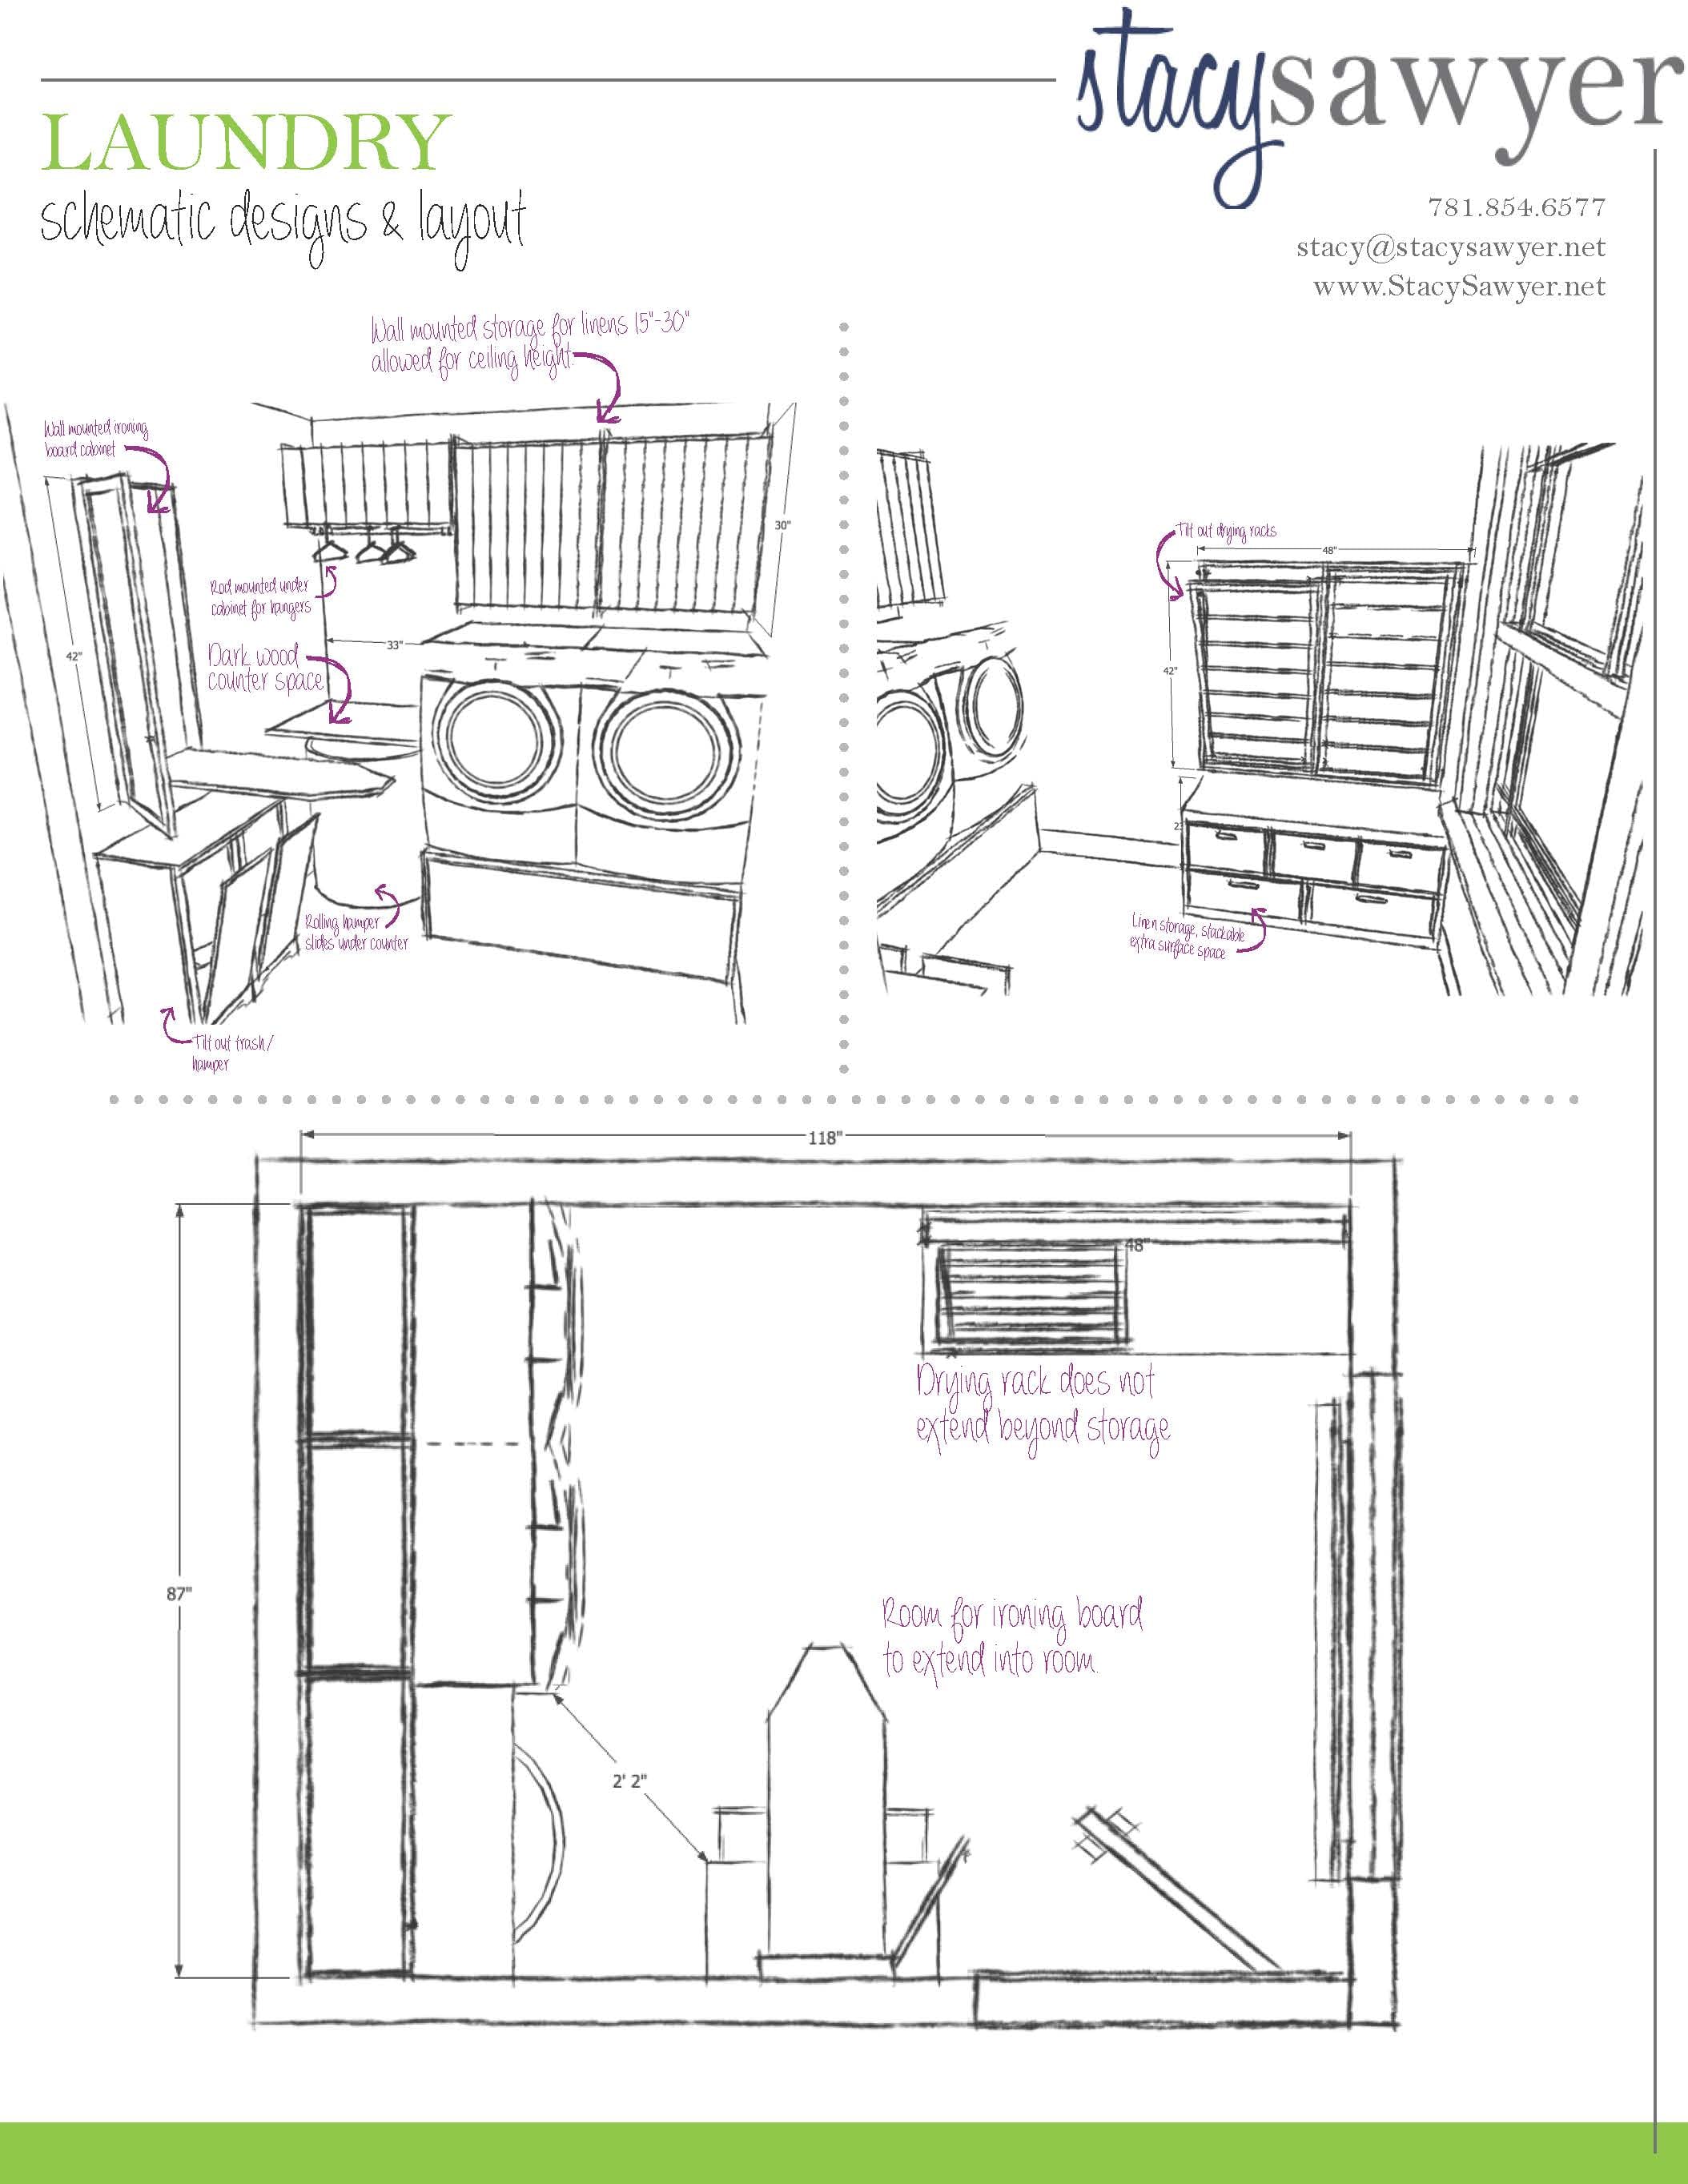 Notes & Laundry Design Boards_Page_4.jpg